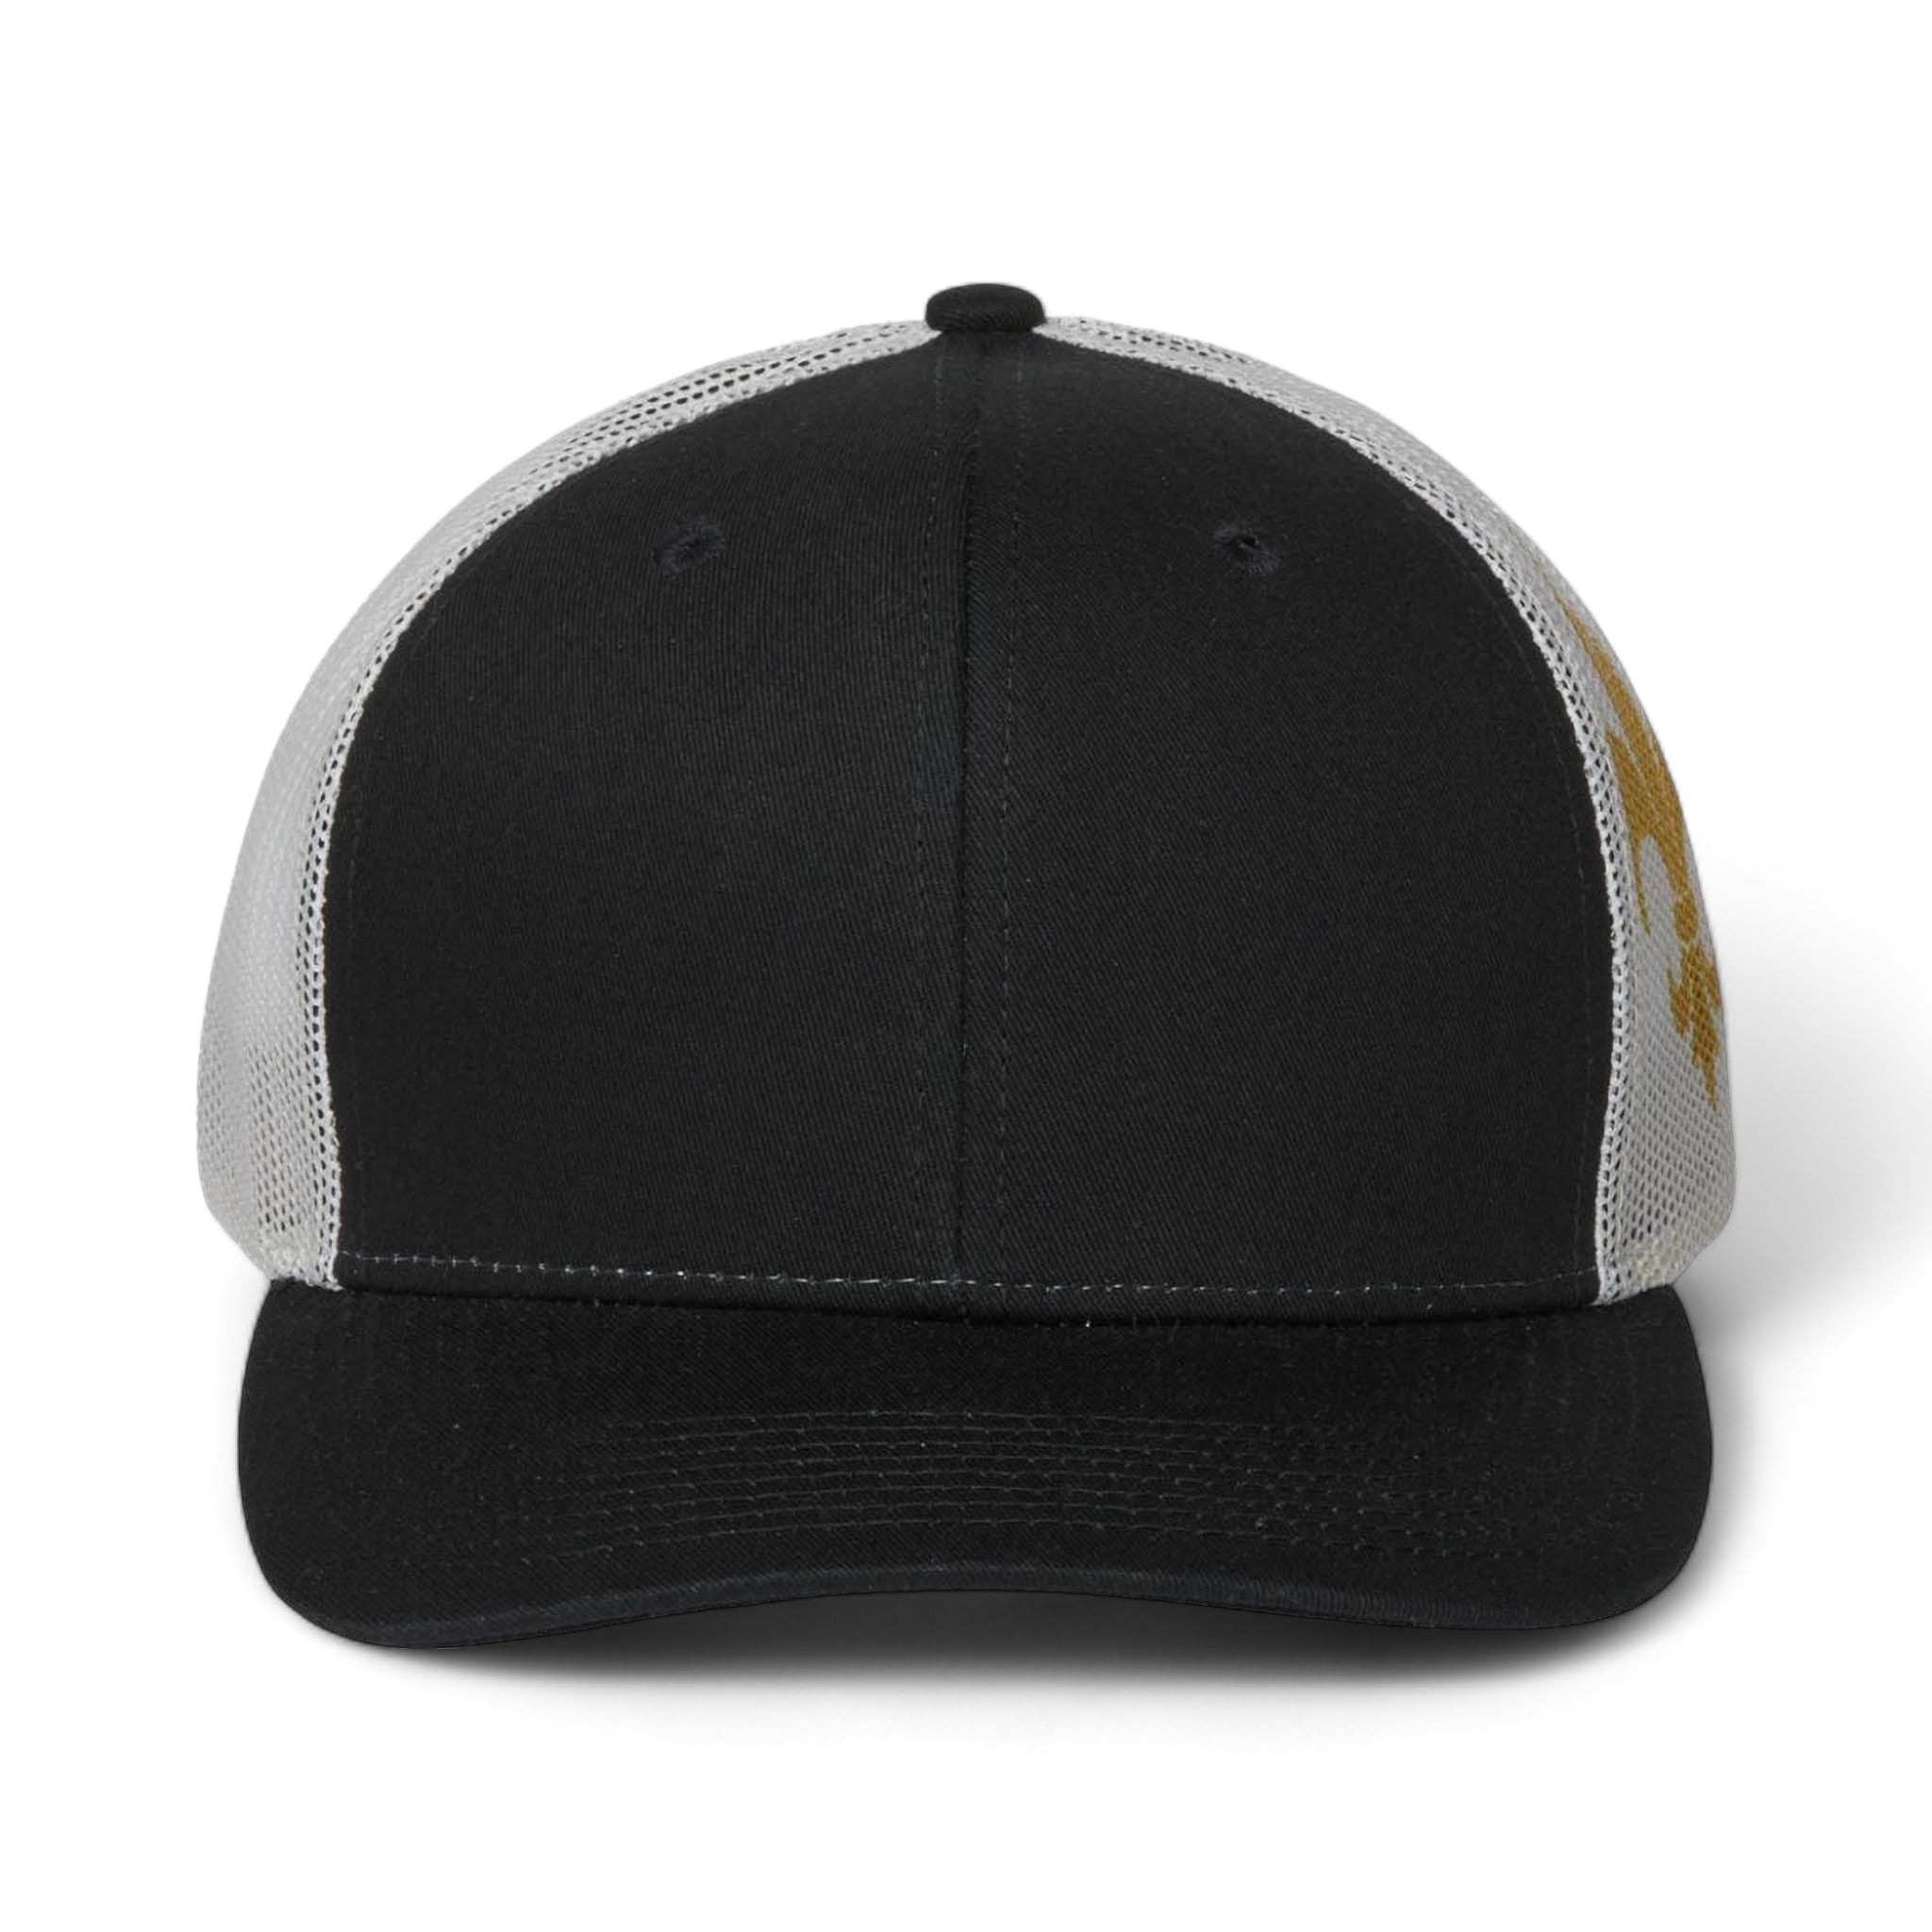 Front view of Kati S700M custom hat in black and vegas gold